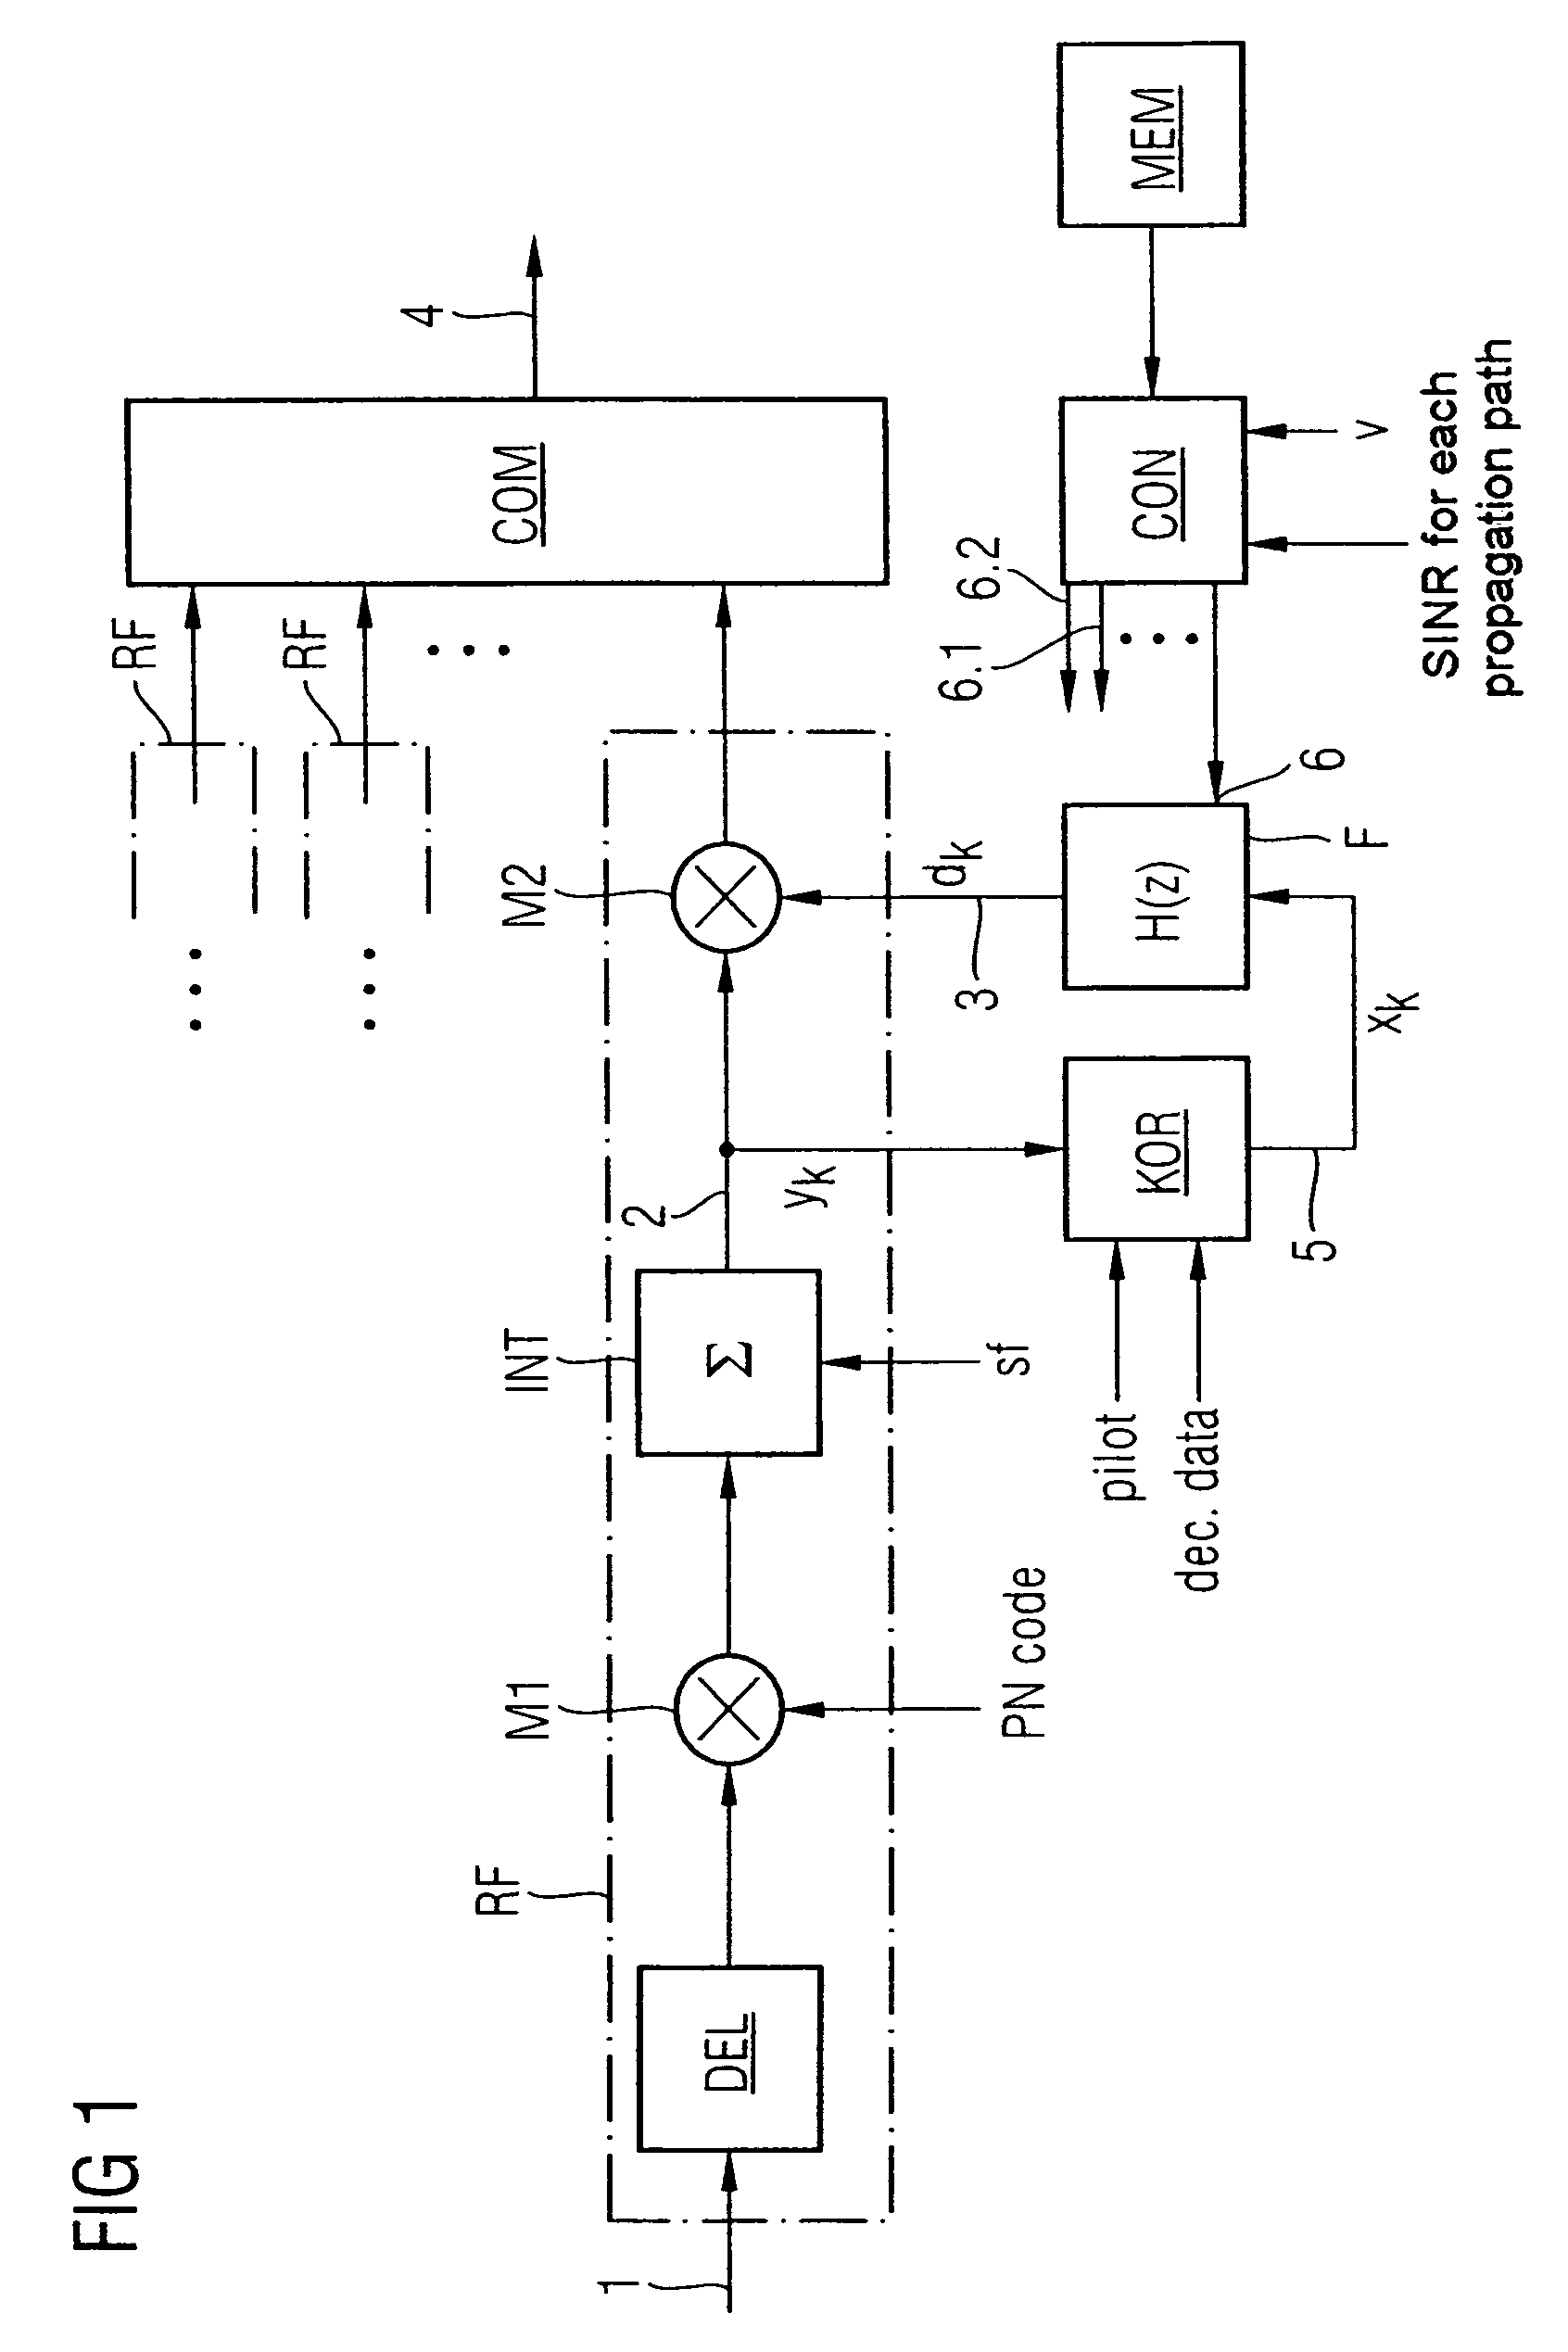 Method and apparatus for channel estimation in radio systems by MMSE-based recursive filtering